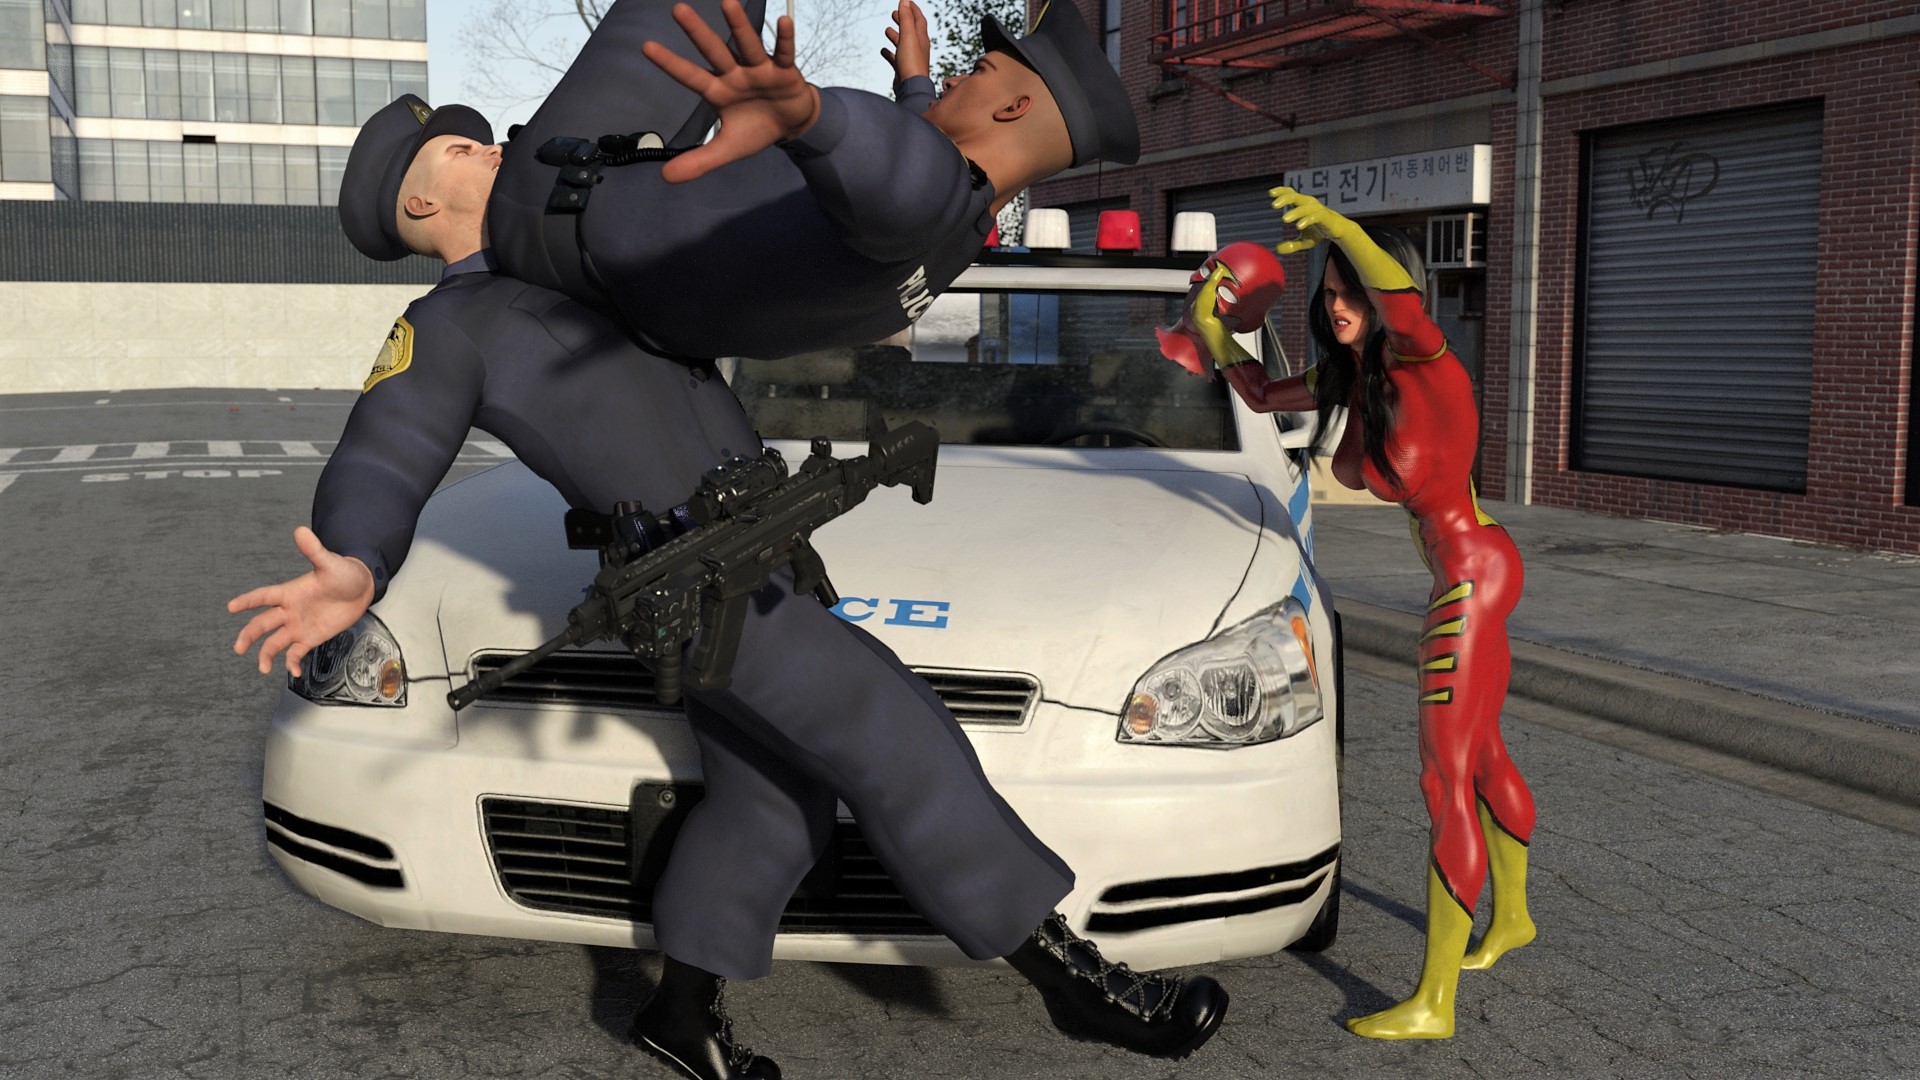 spiderwoman police brutality 15 by mannameded-db7ck7i